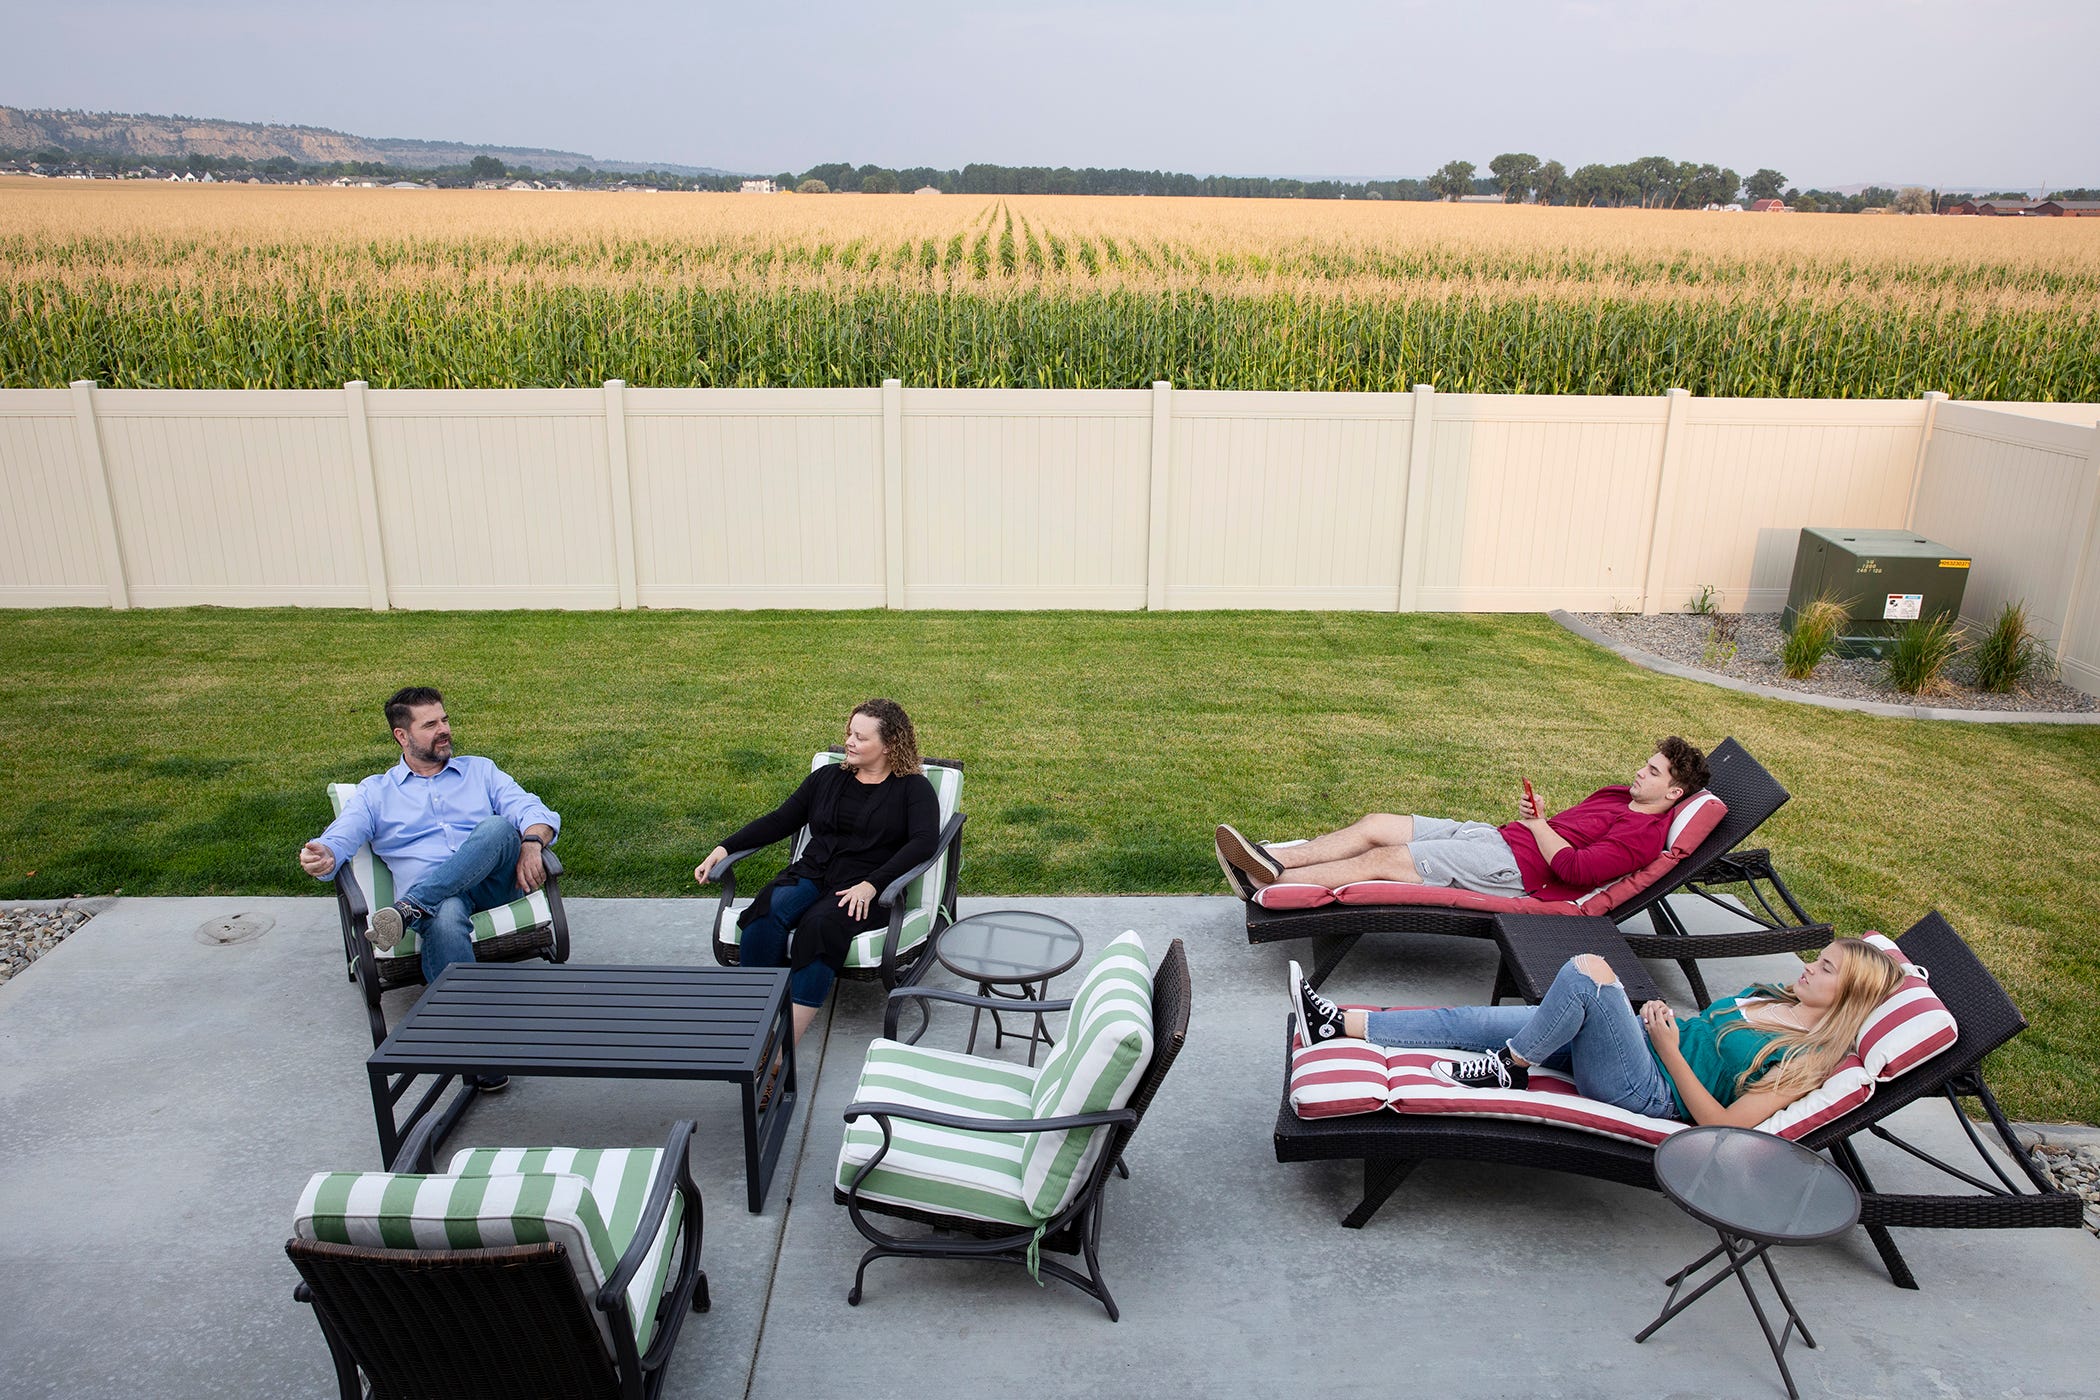 Four members of the Jansezian family lounge on deckchairs on their patio in their back garden.